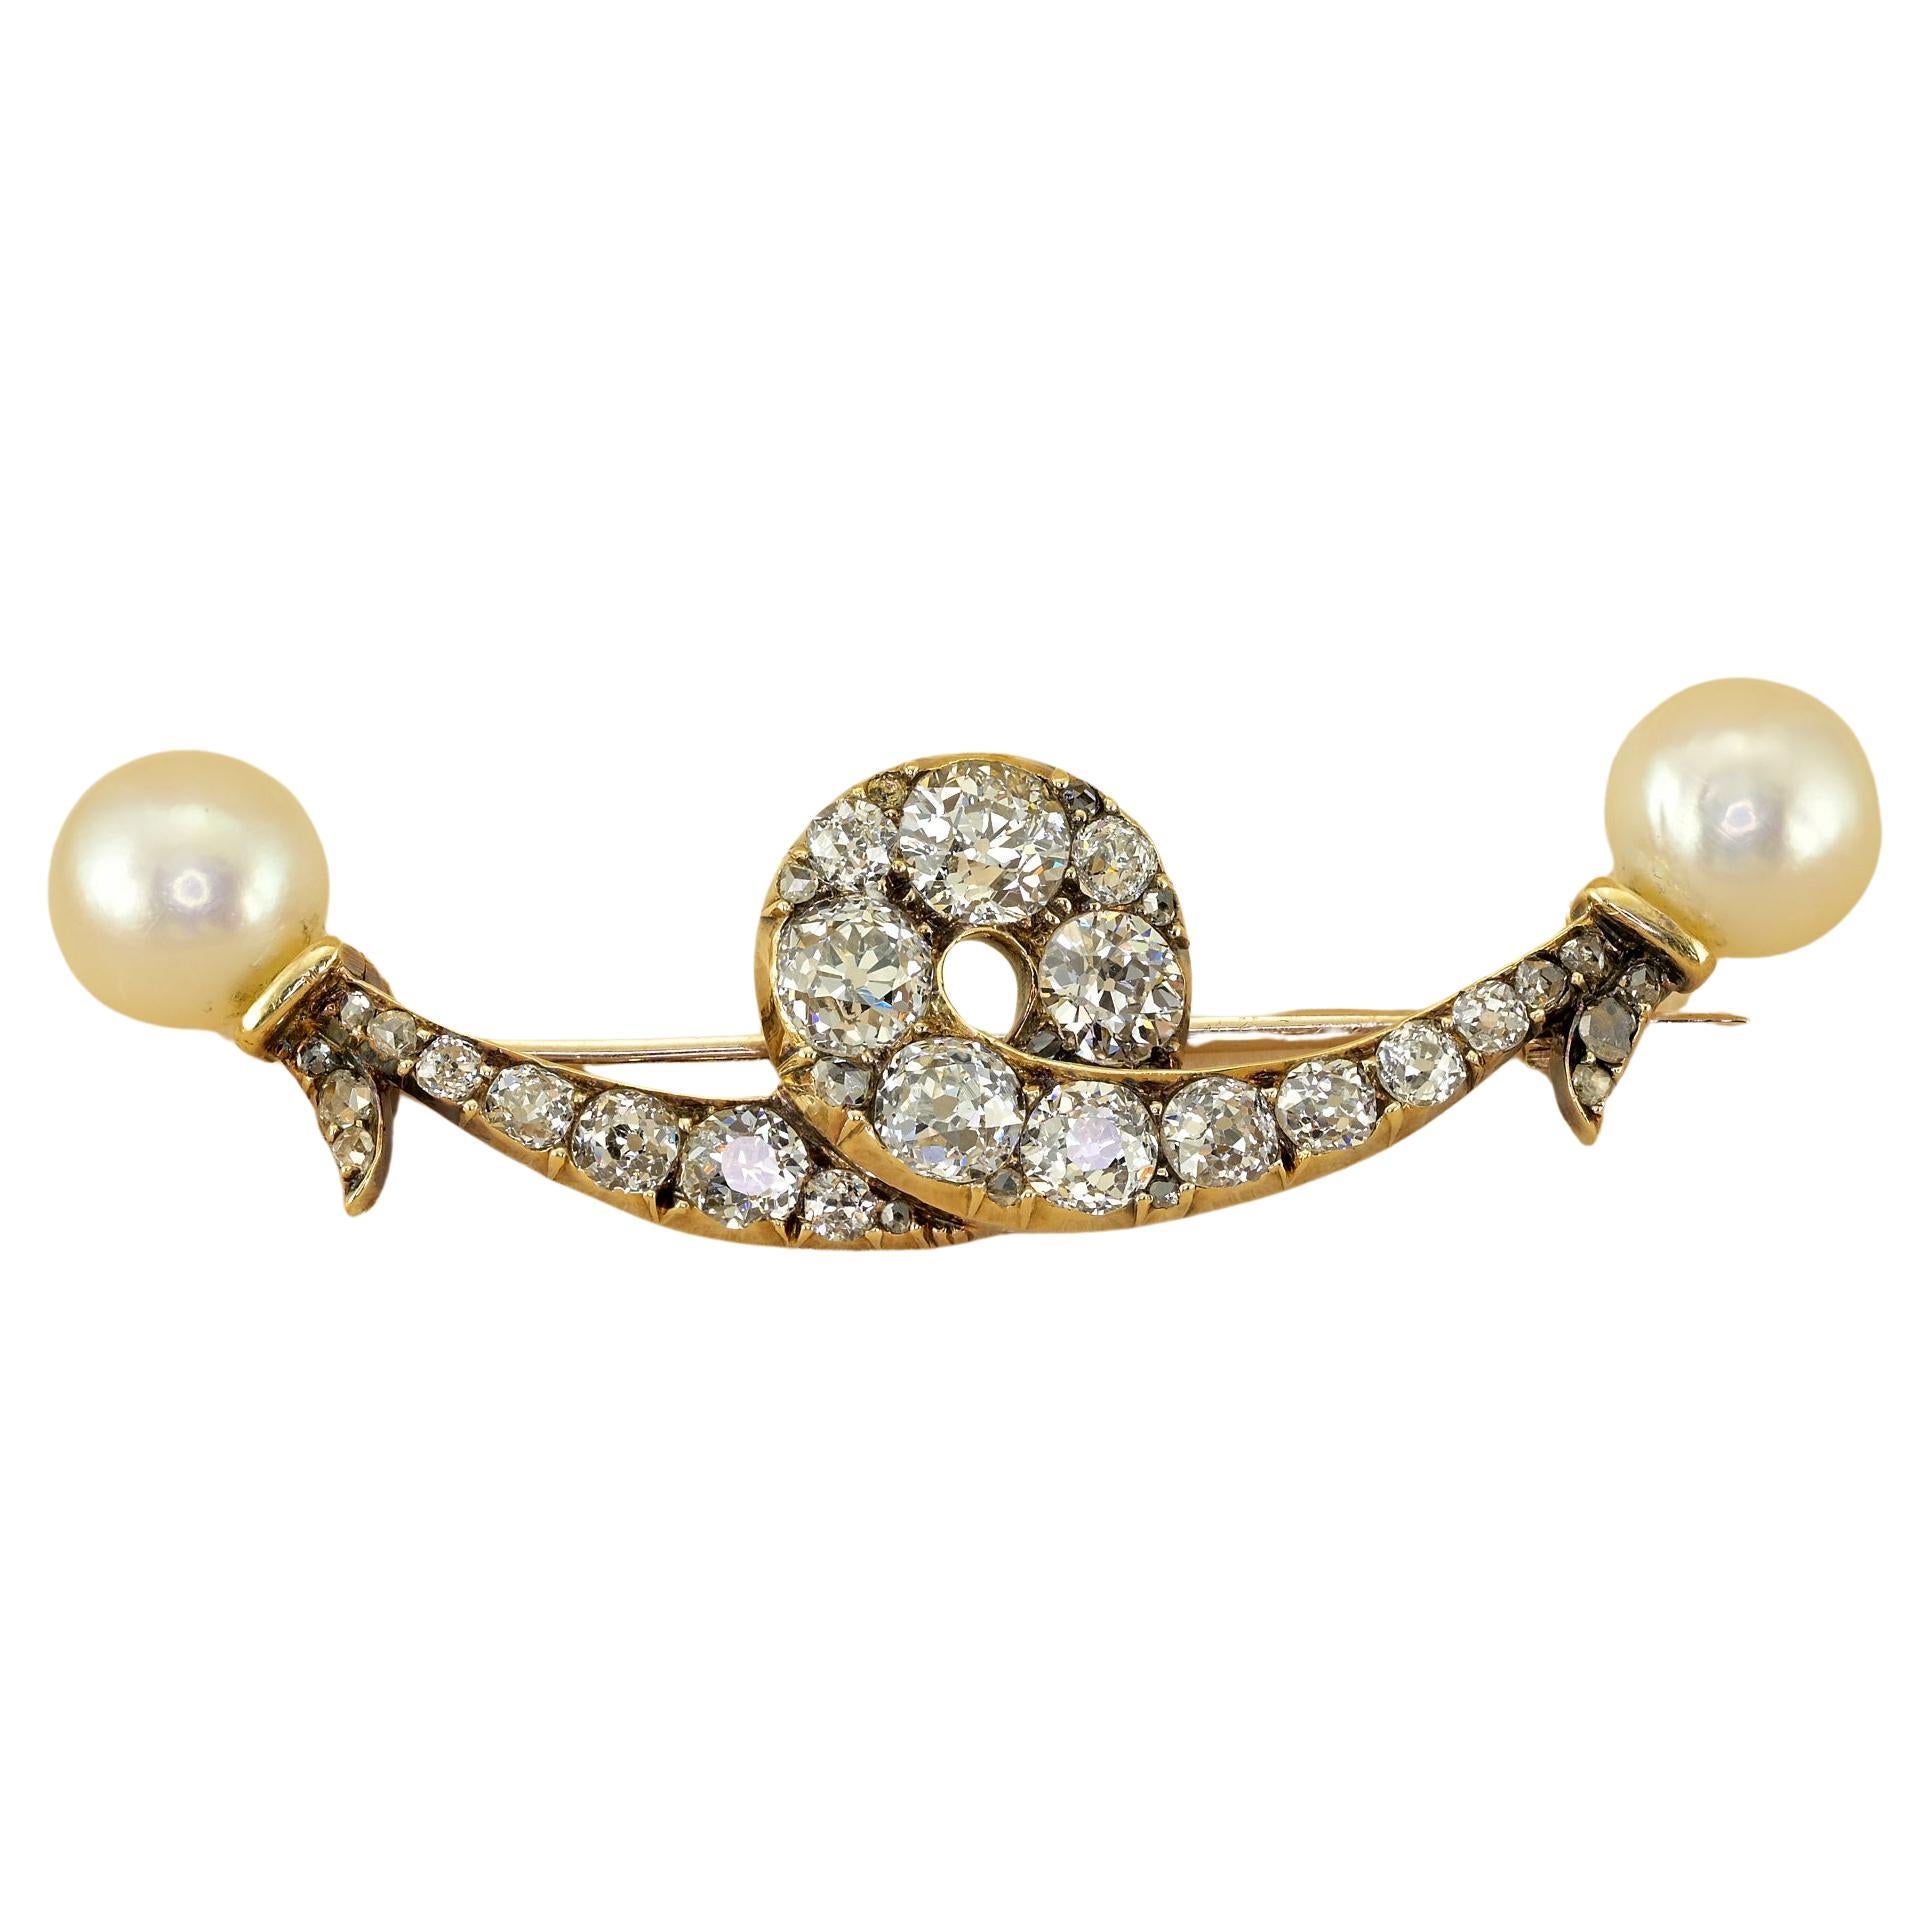 Broche Victorienne 2.60 Ct Diamond Natural Pearl Bow Brooch 18 KT